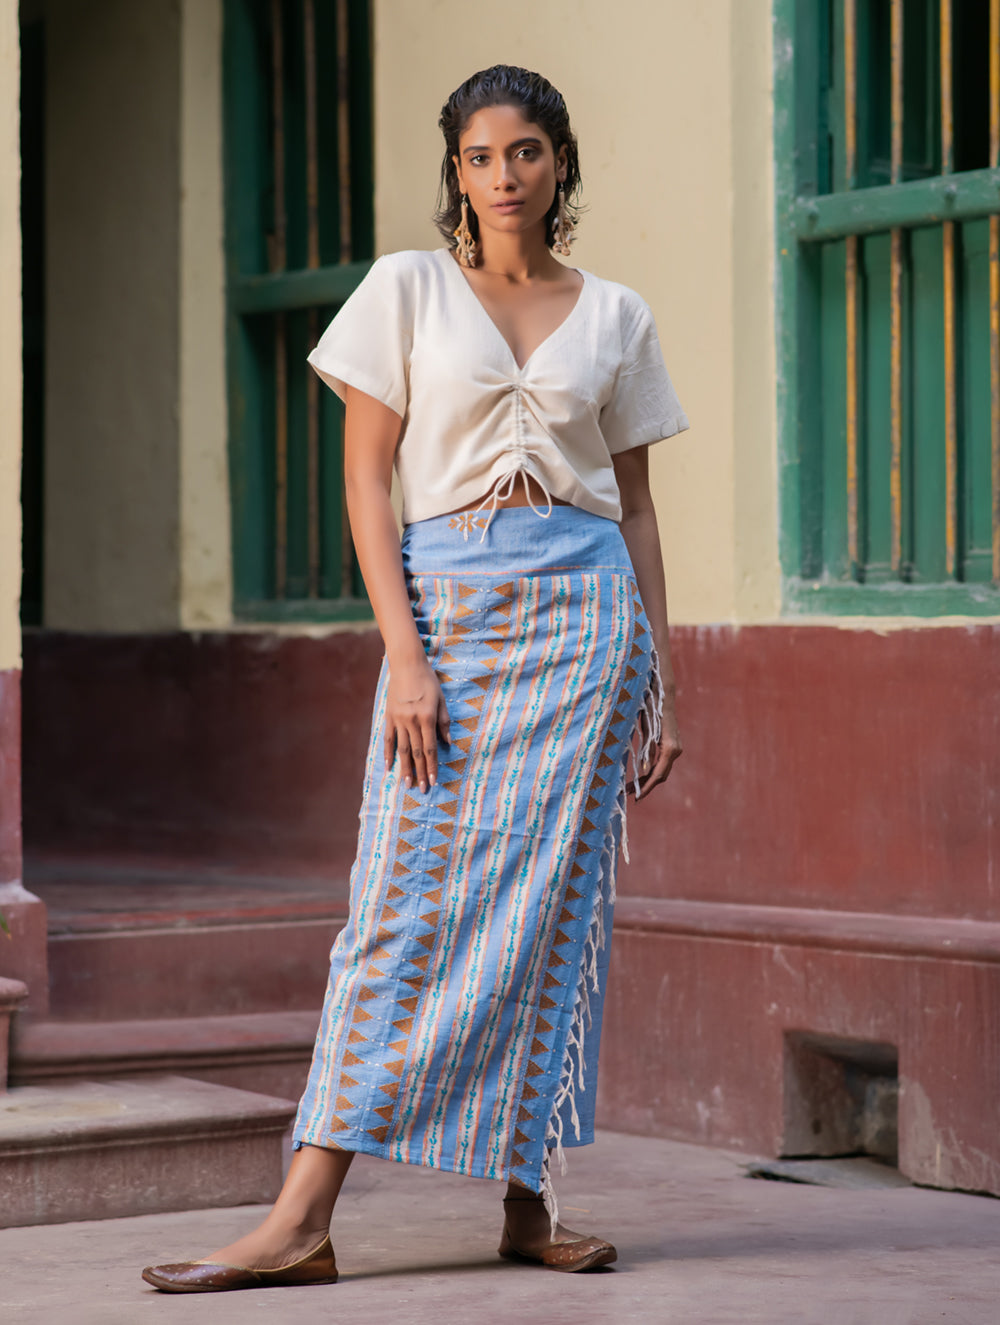 Load image into Gallery viewer, Handwoven Khesh &amp; Kantha Embroidered Cotton Wrap Skirt - Powder Blue